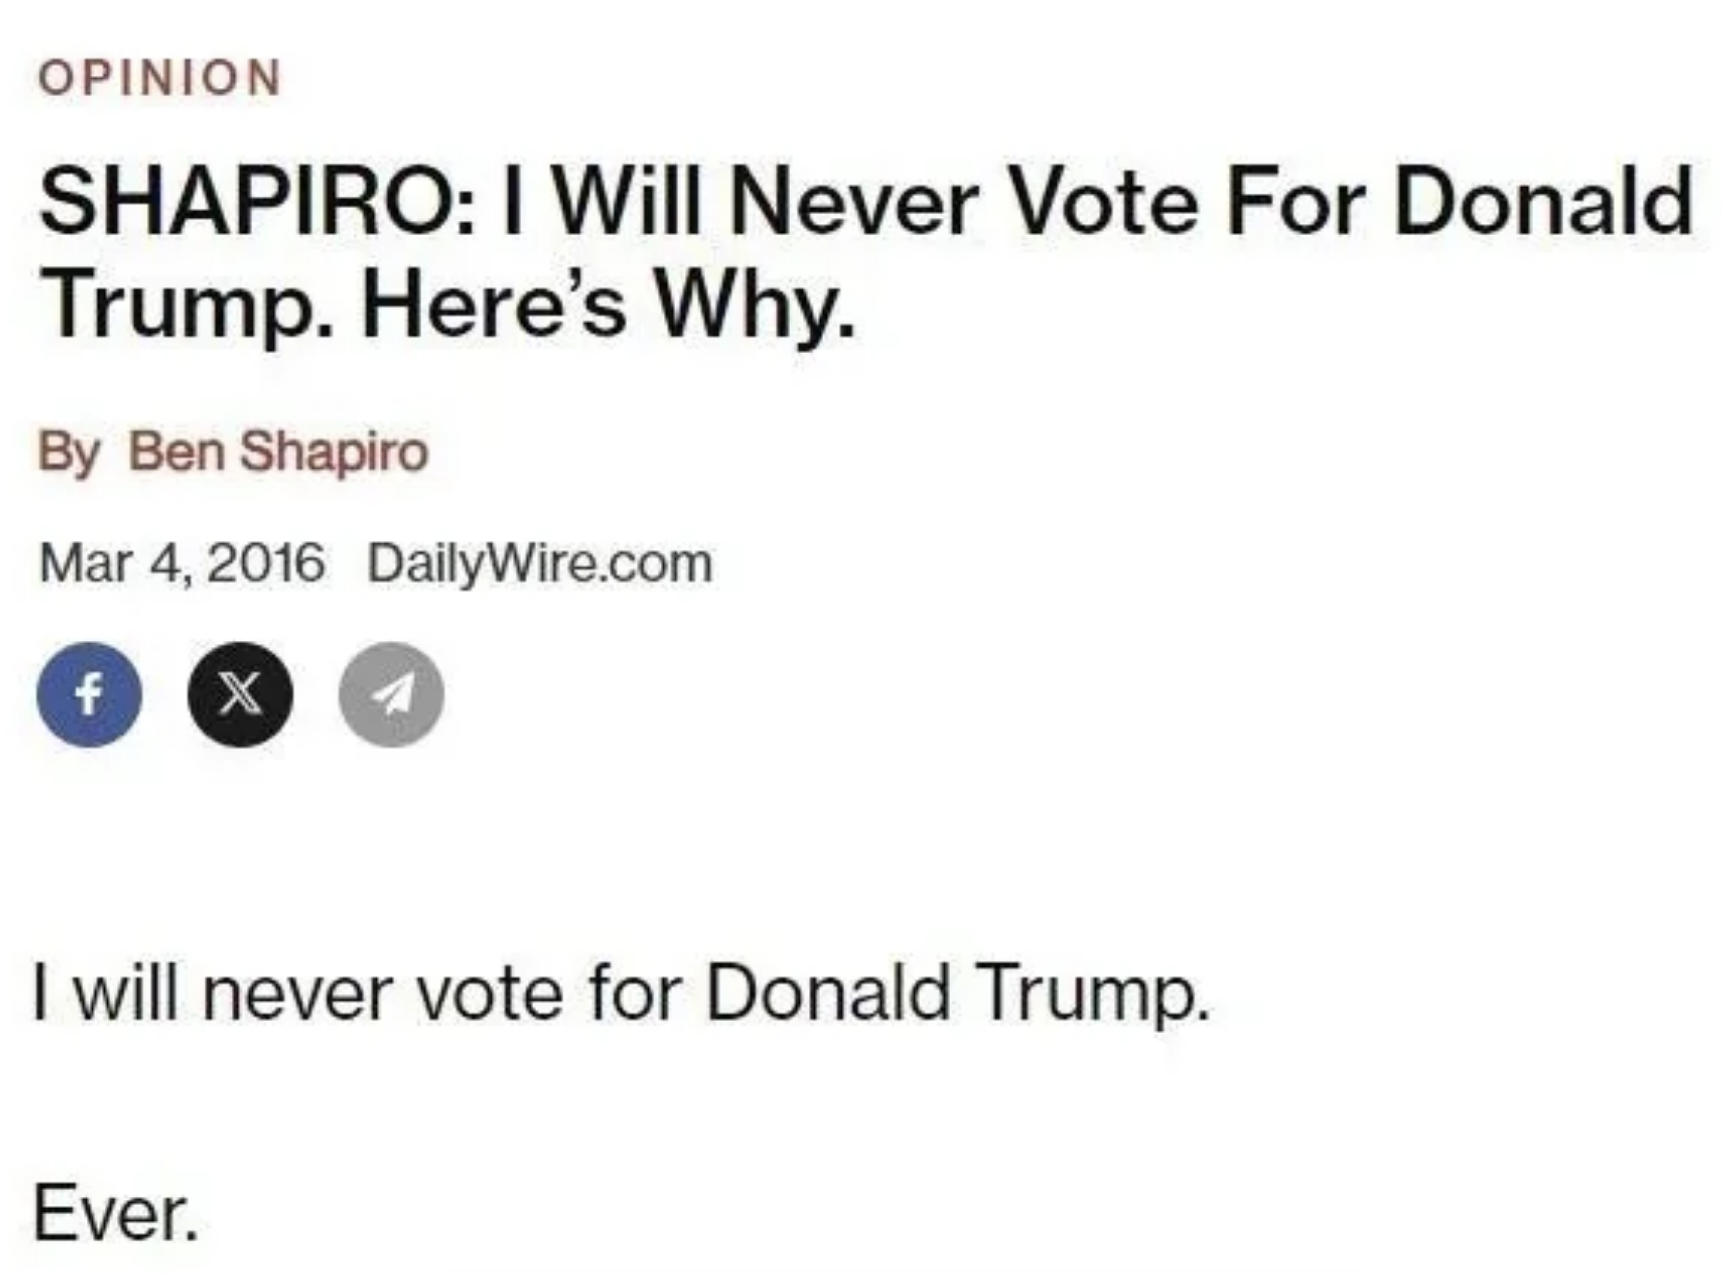 Opinion article by Ben Shapiro stating he will never vote for Donald Trump, dated Mar 4, 2016, on DailyWire.com